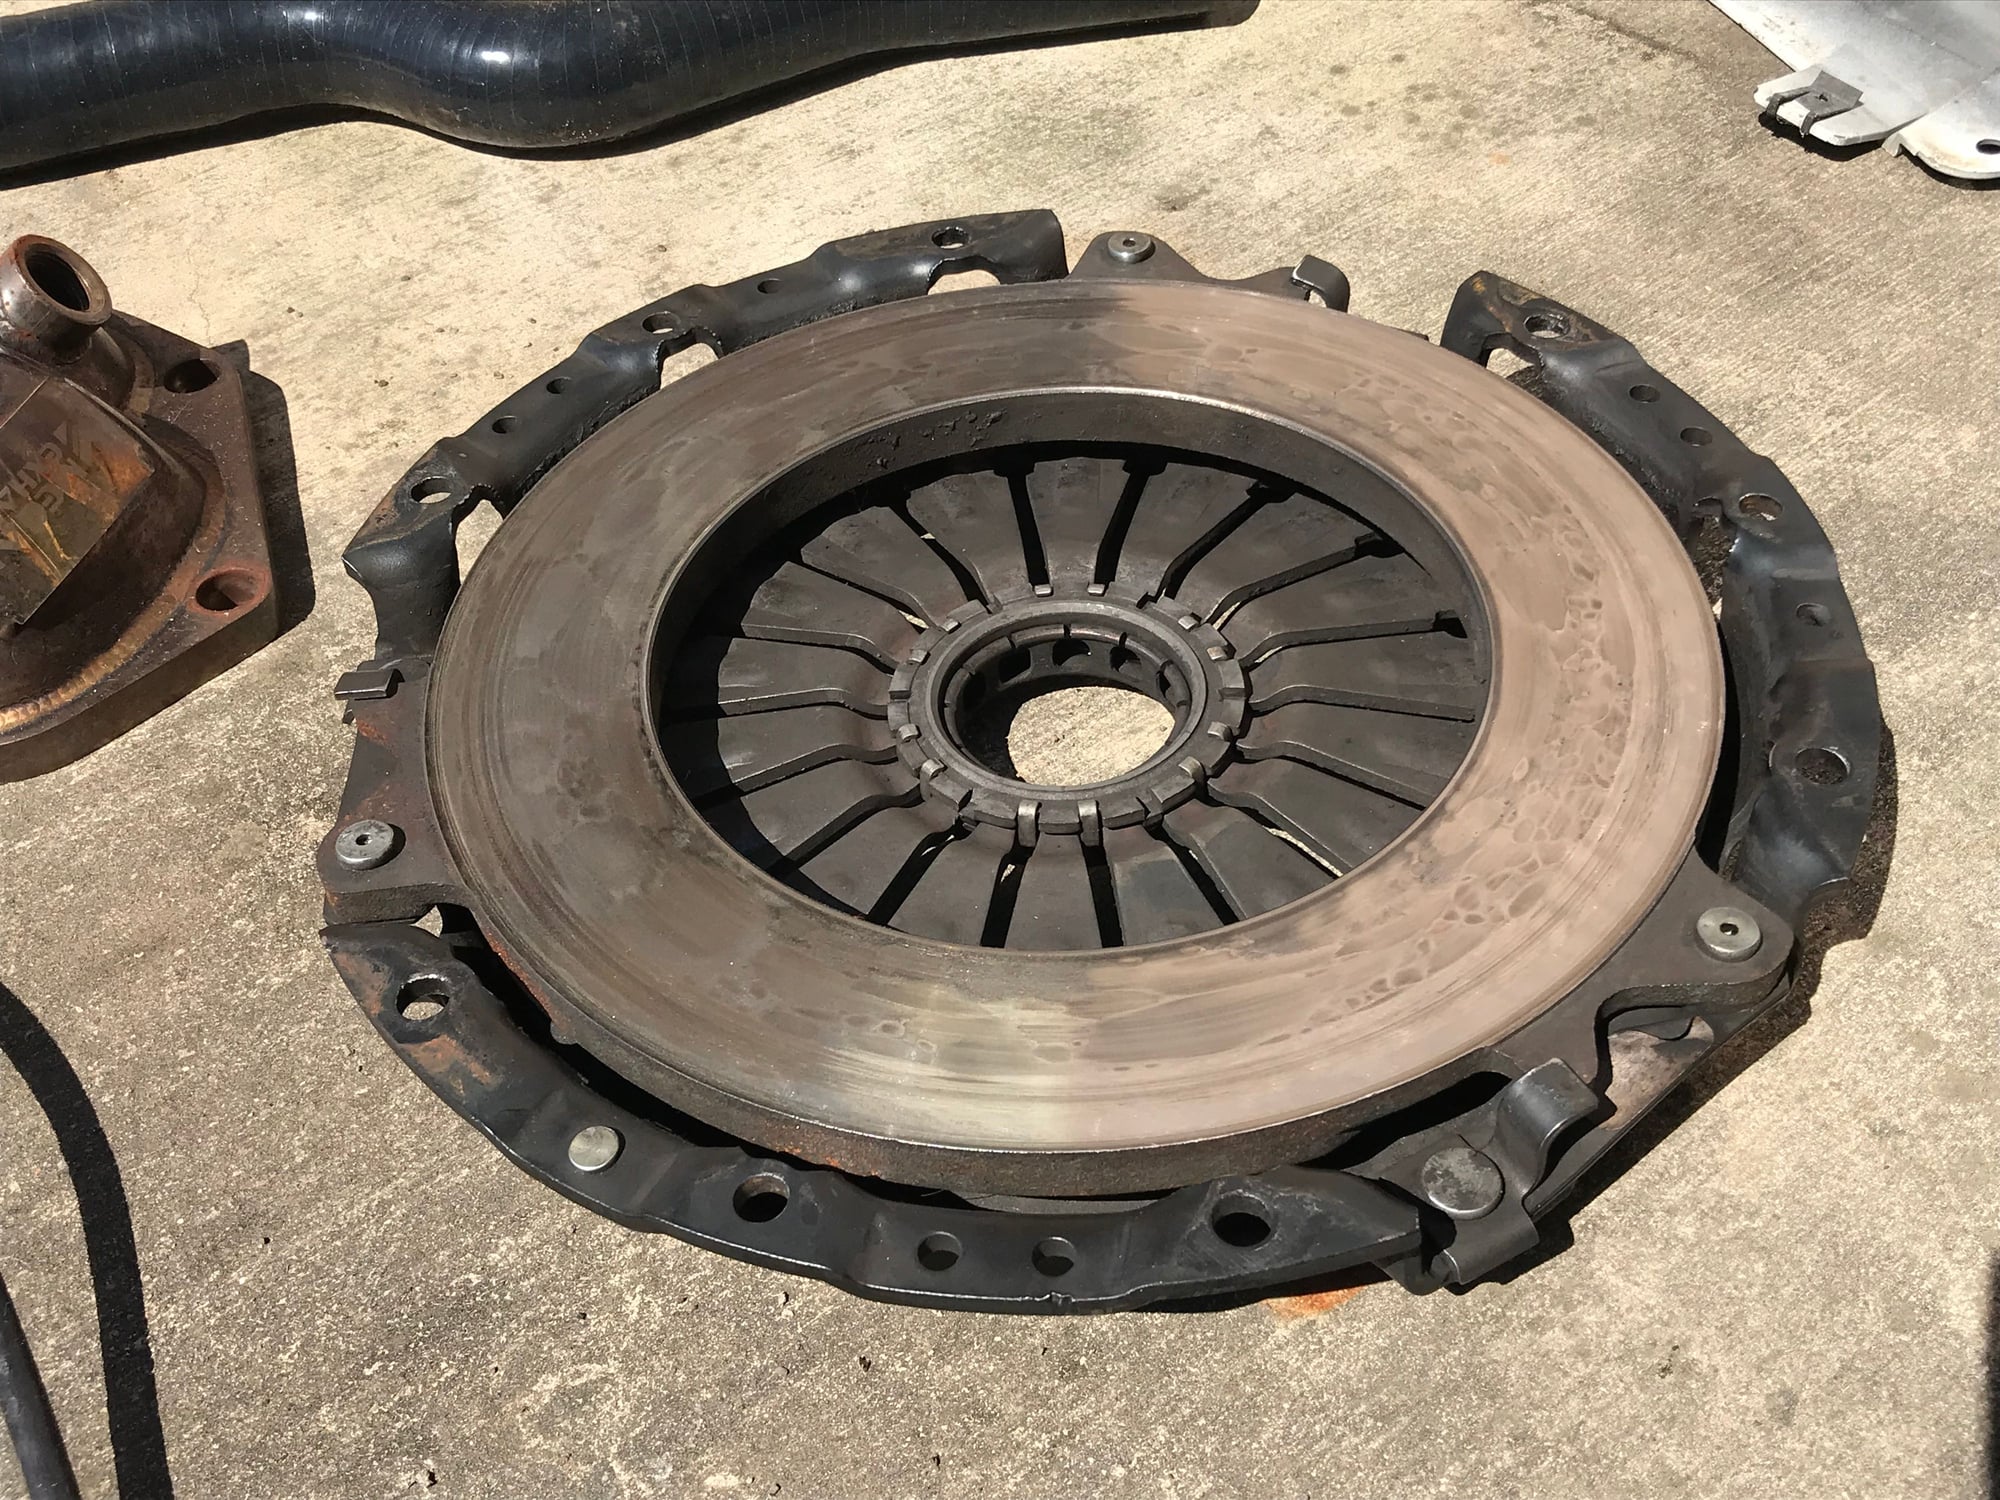 Miscellaneous - Evo 8/9 Parts Cheap Will Take Offers - Used - 2003 to 2006 Mitsubishi Lancer Evolution - Plano, TX 75024, United States